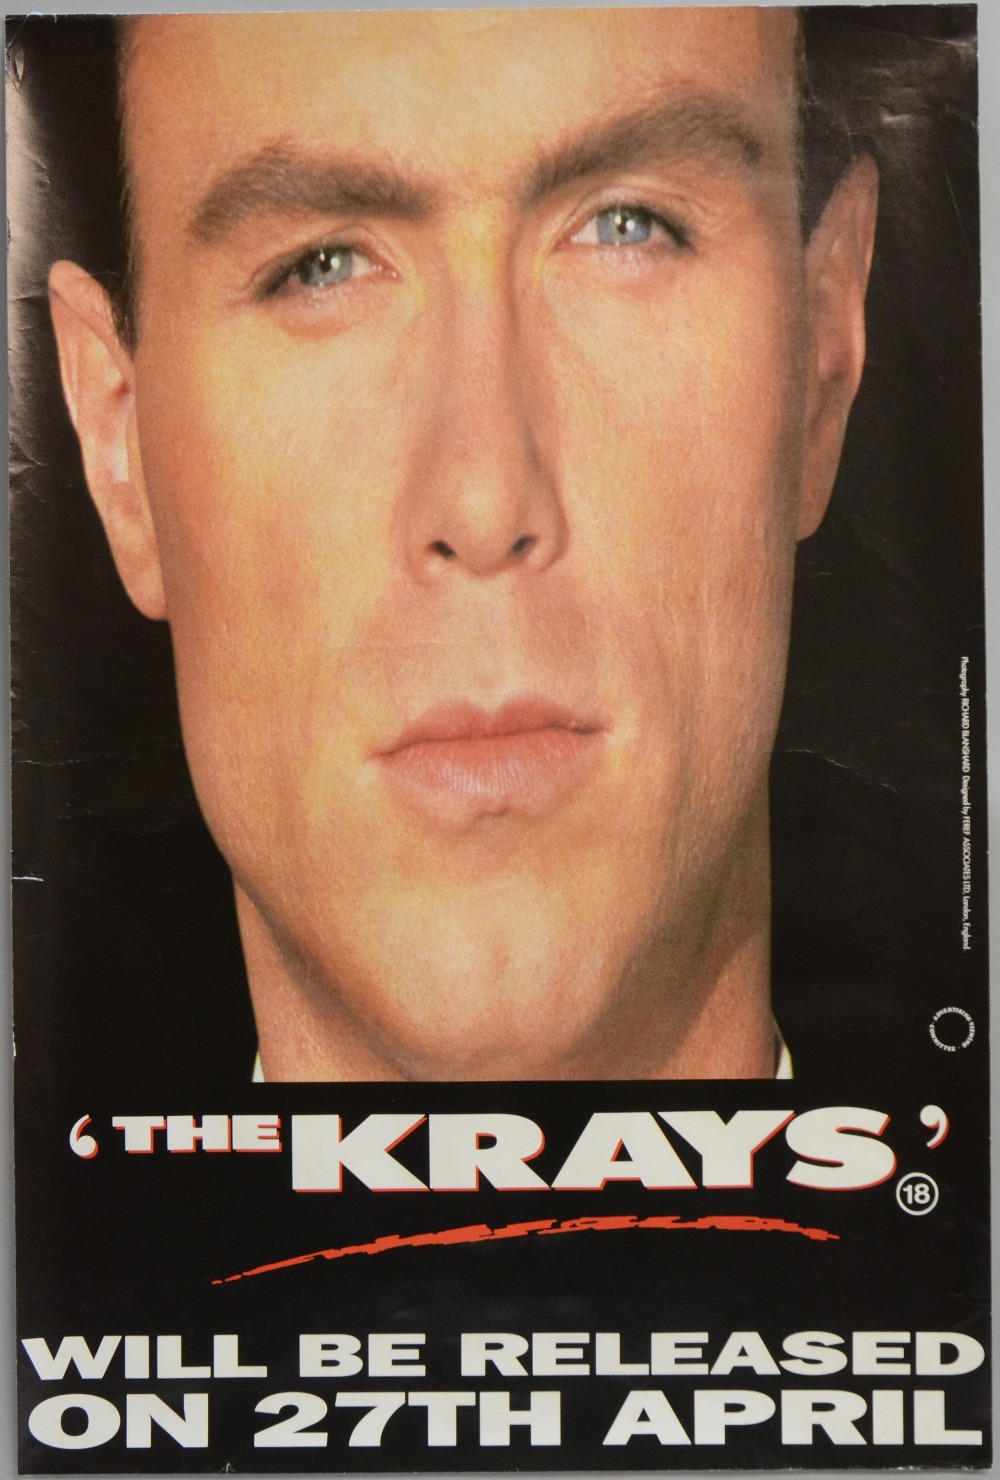 The Krays (1990) British double-crown film poster, rolled 30 x 20 inches51 x 76cm - Image 2 of 3